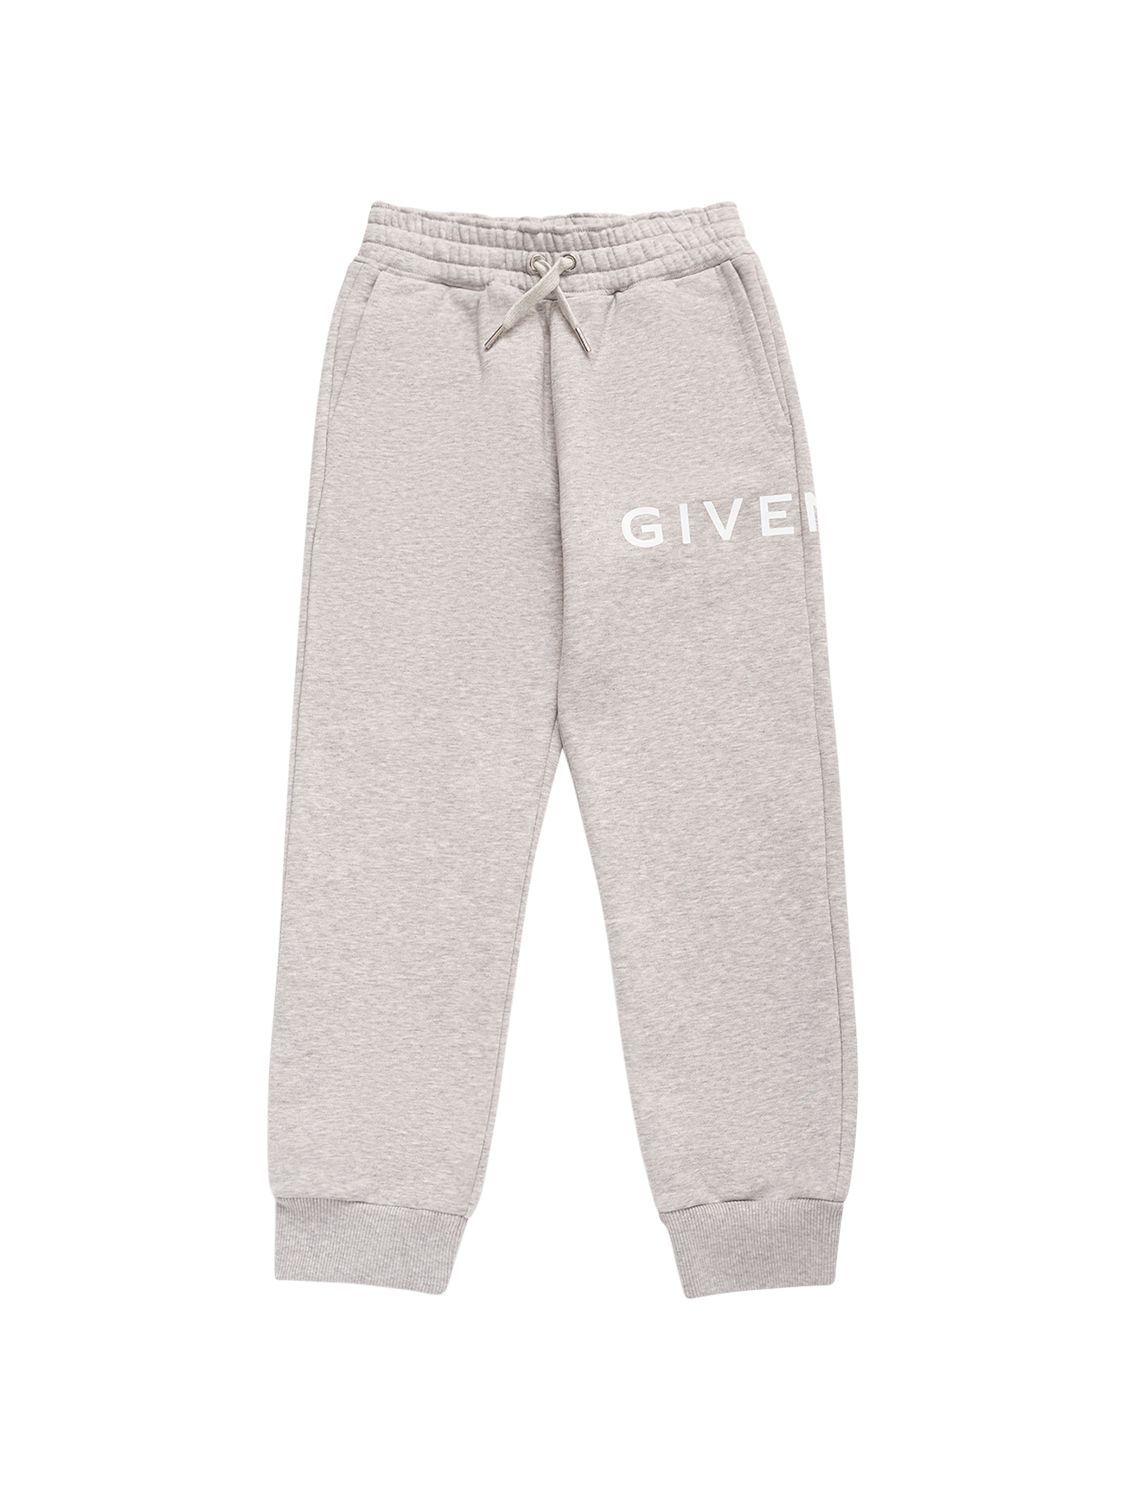 Givenchy Logo Printed Cotton Blend Sweatpants In Gray